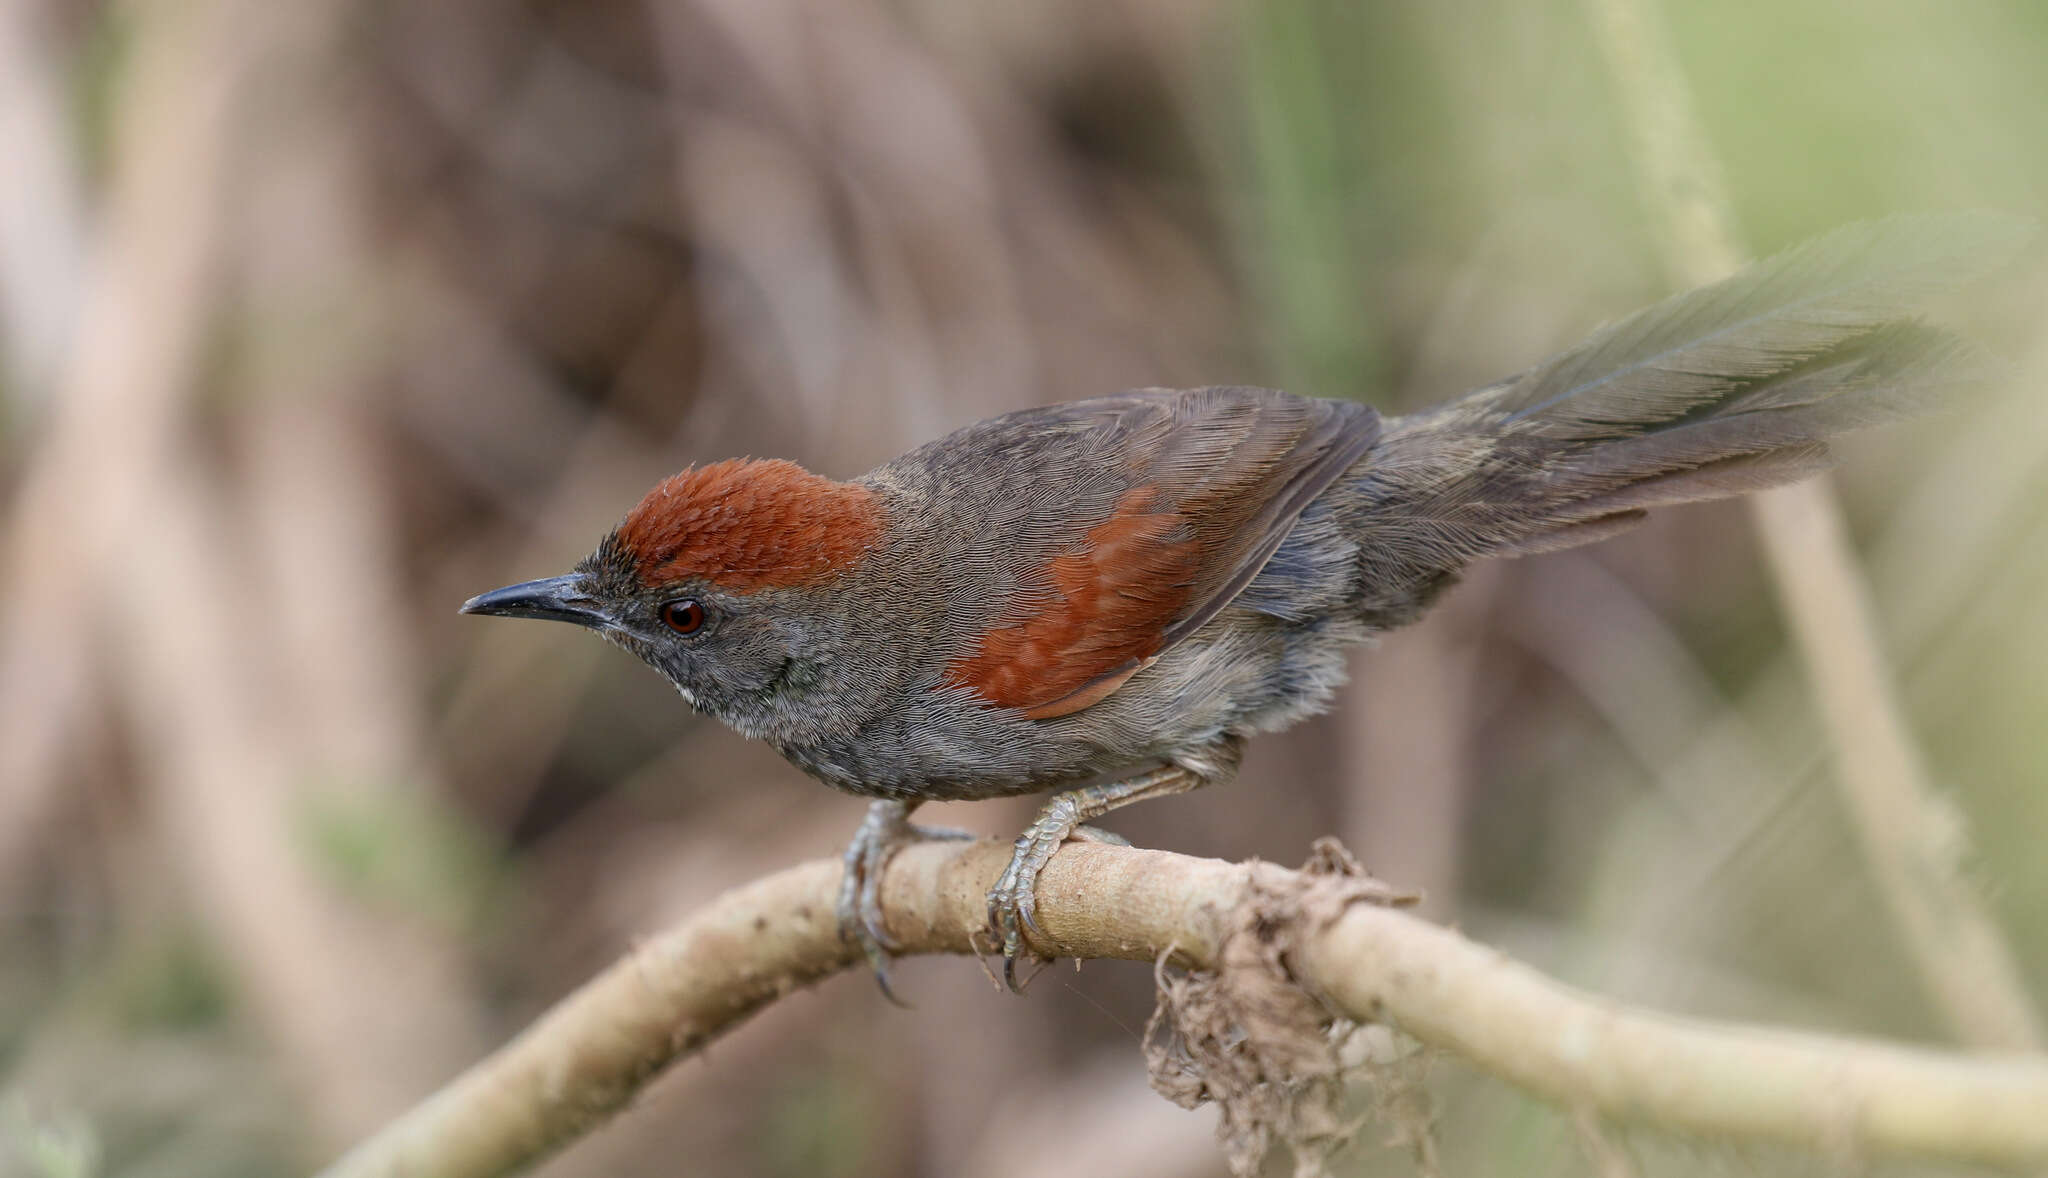 Image of Cinereous-breasted Spinetail